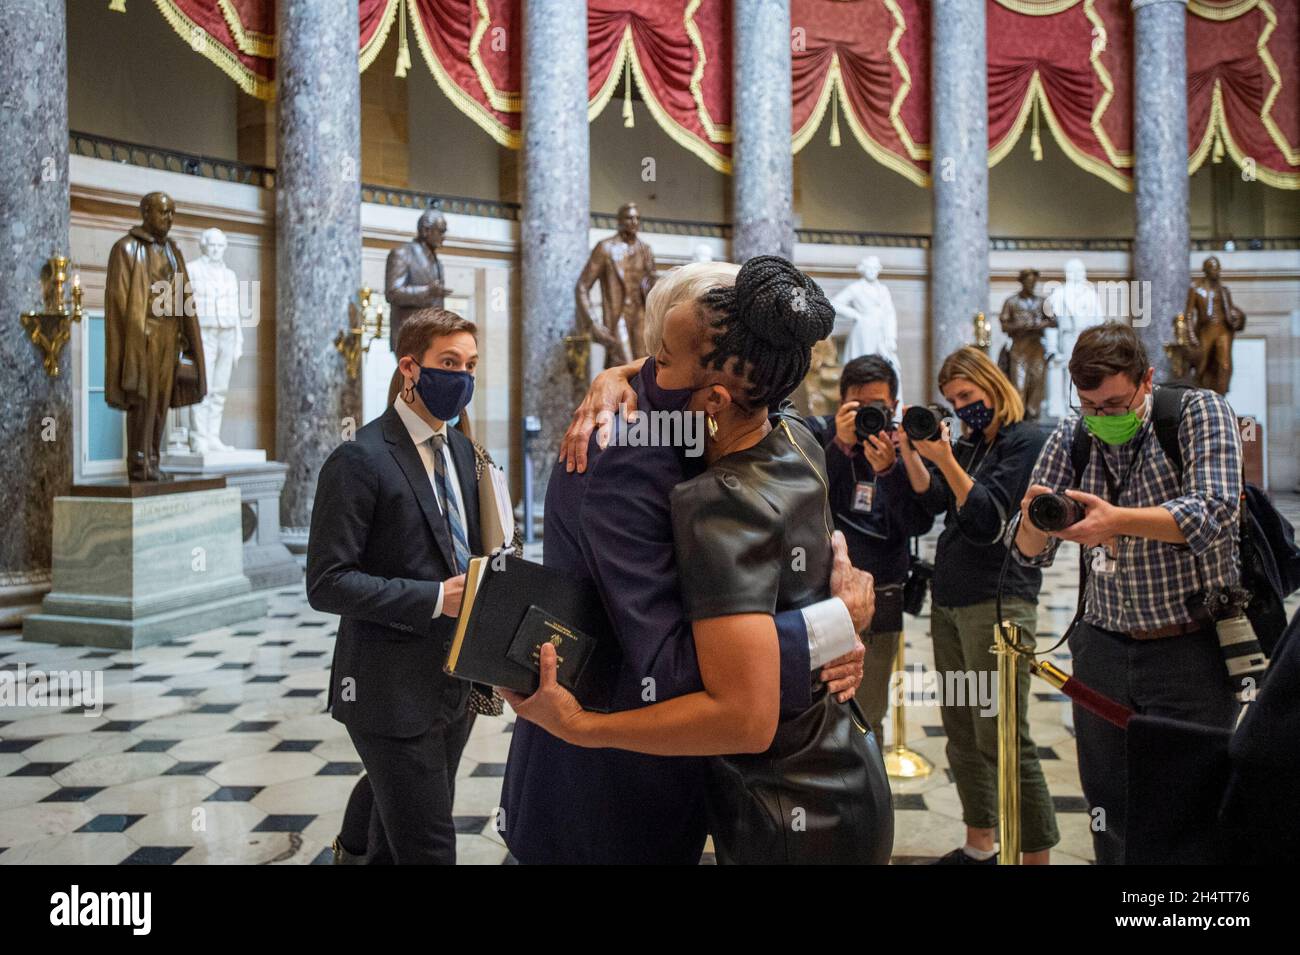 United States Representative Shontel Brown (Democrat of Ohio), right, is embraced by United States House Majority Leader Steny Hoyer (Democrat of Maryland), left, after being sworn-in as a member of the Congressional Black Caucus in Statuary Hall at the US Capitol in Washington, DC, Thursday, November 4, 2021. Credit: Rod Lamkey/CNP Stock Photo